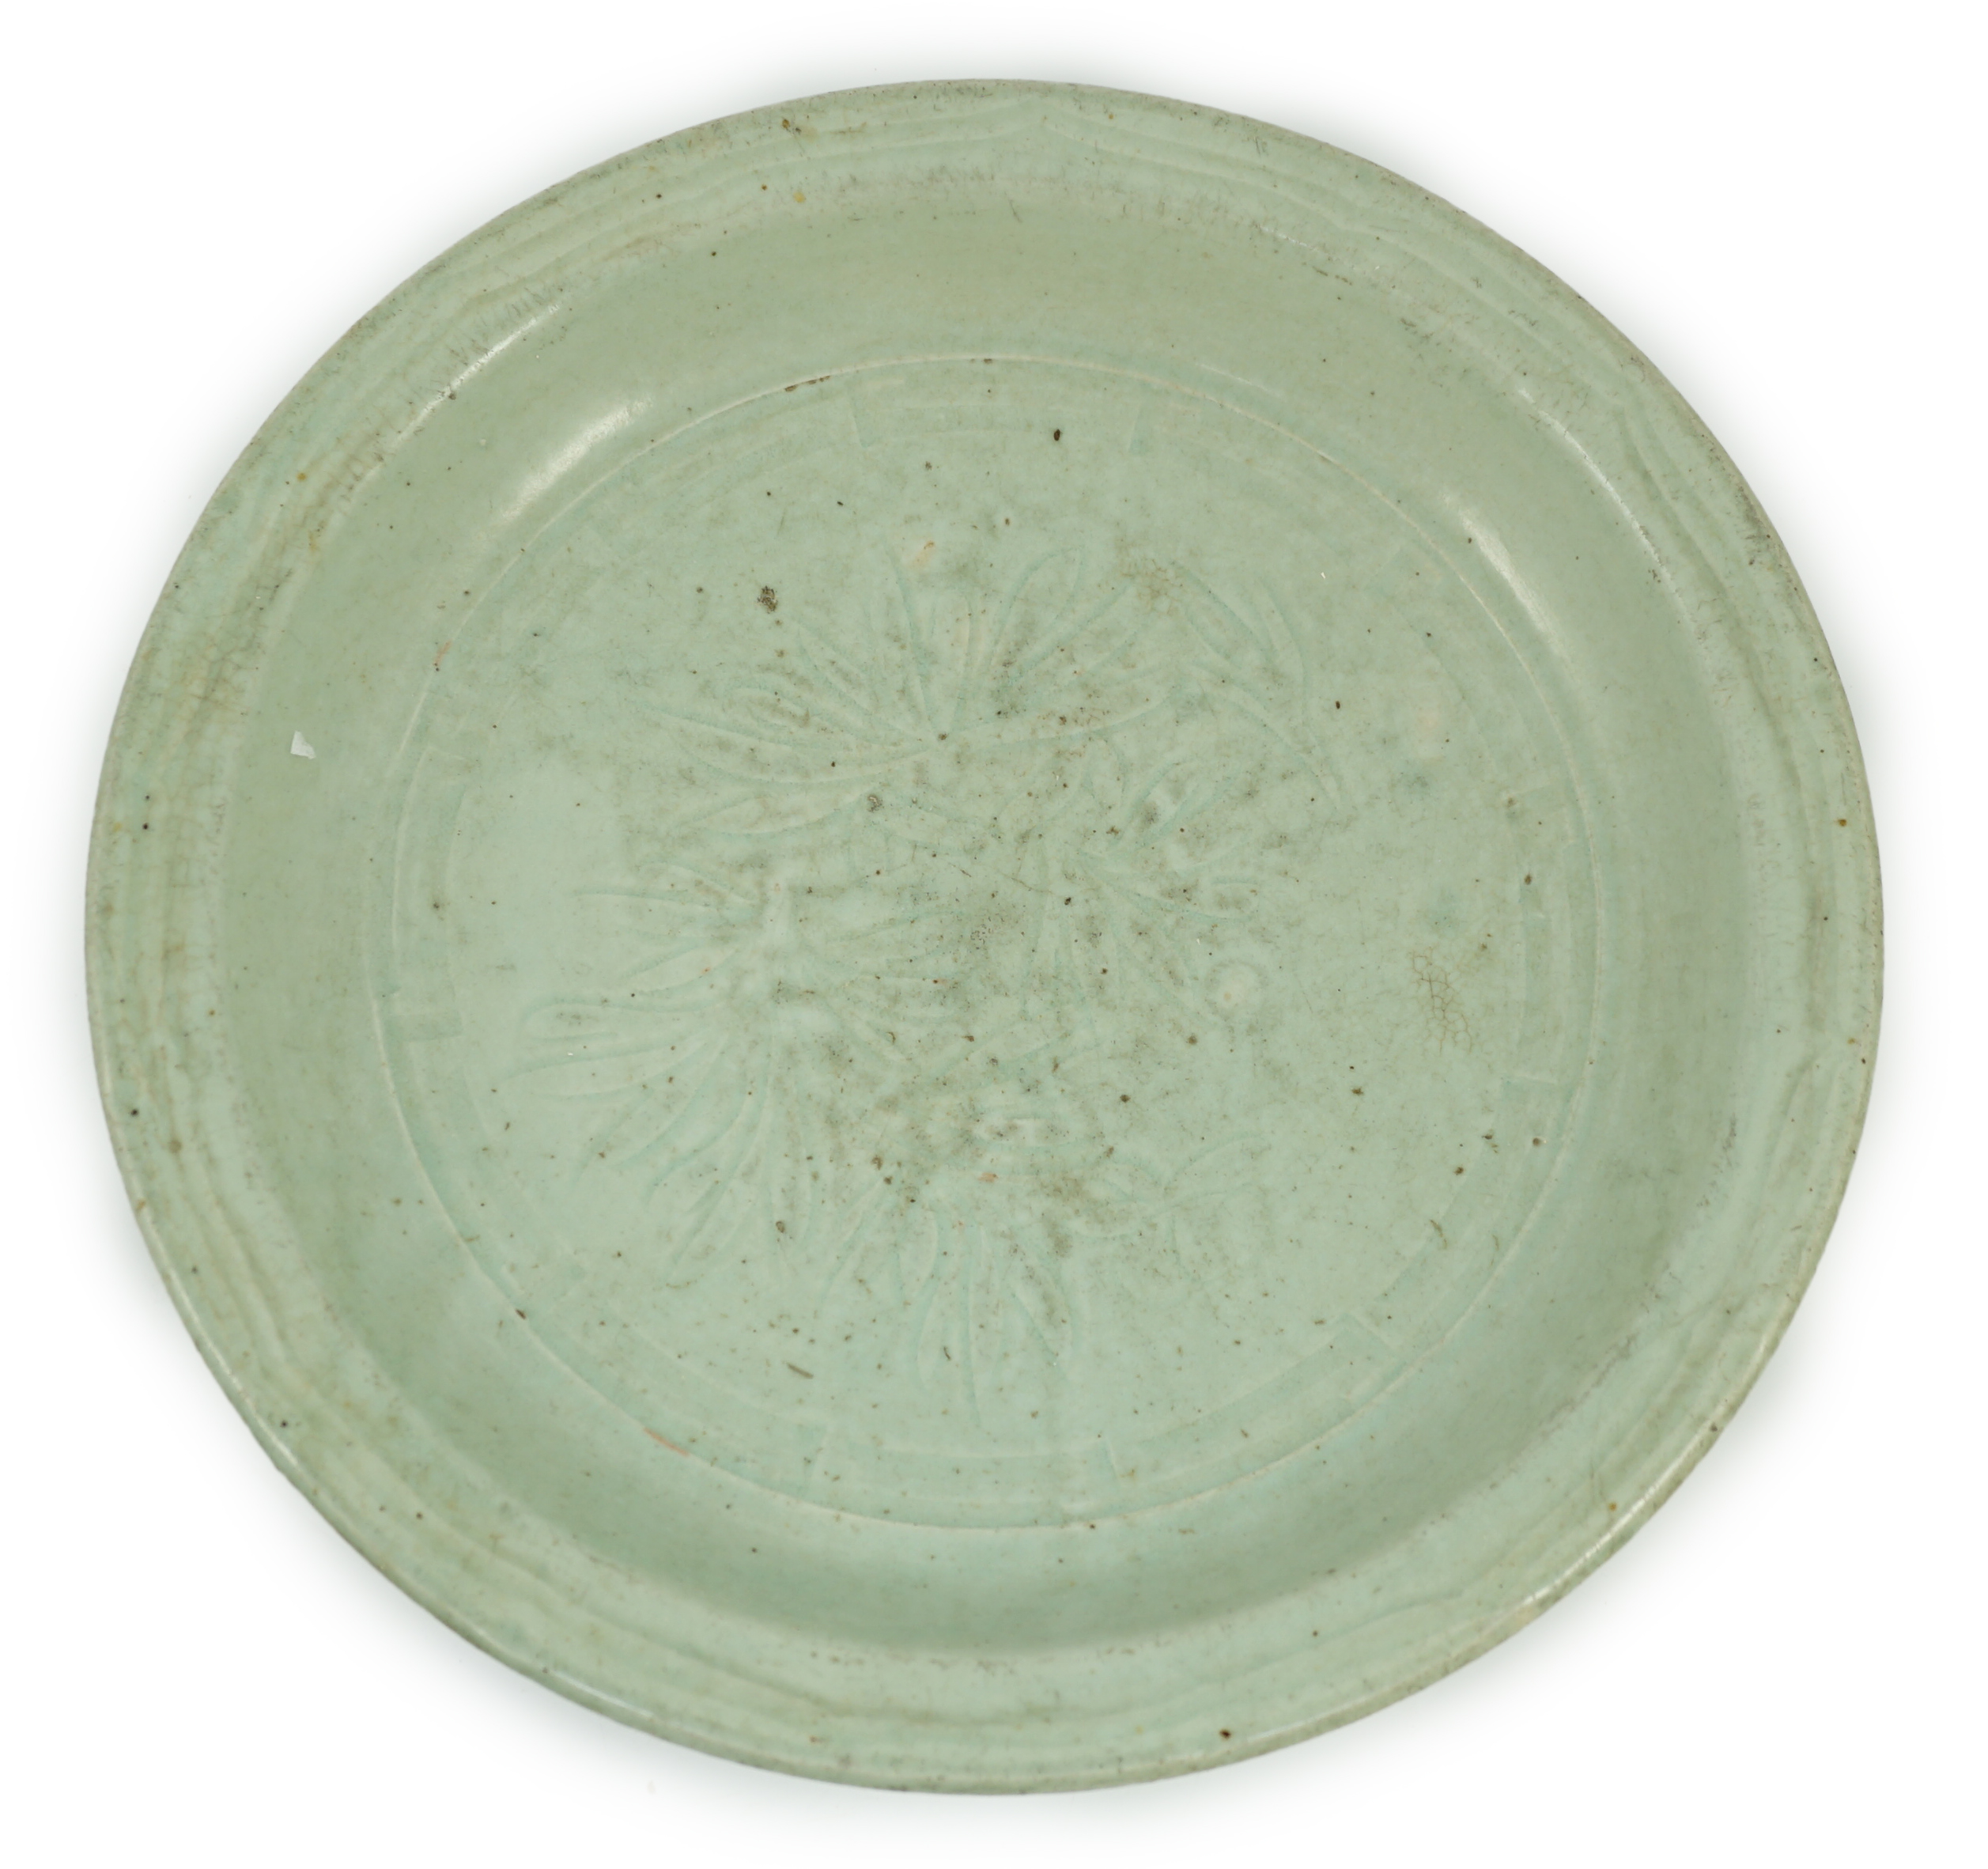 A Chinese Longquan celadon dish, Yuan-Ming dynasty, 13th/14th century, covered in a pale sea green